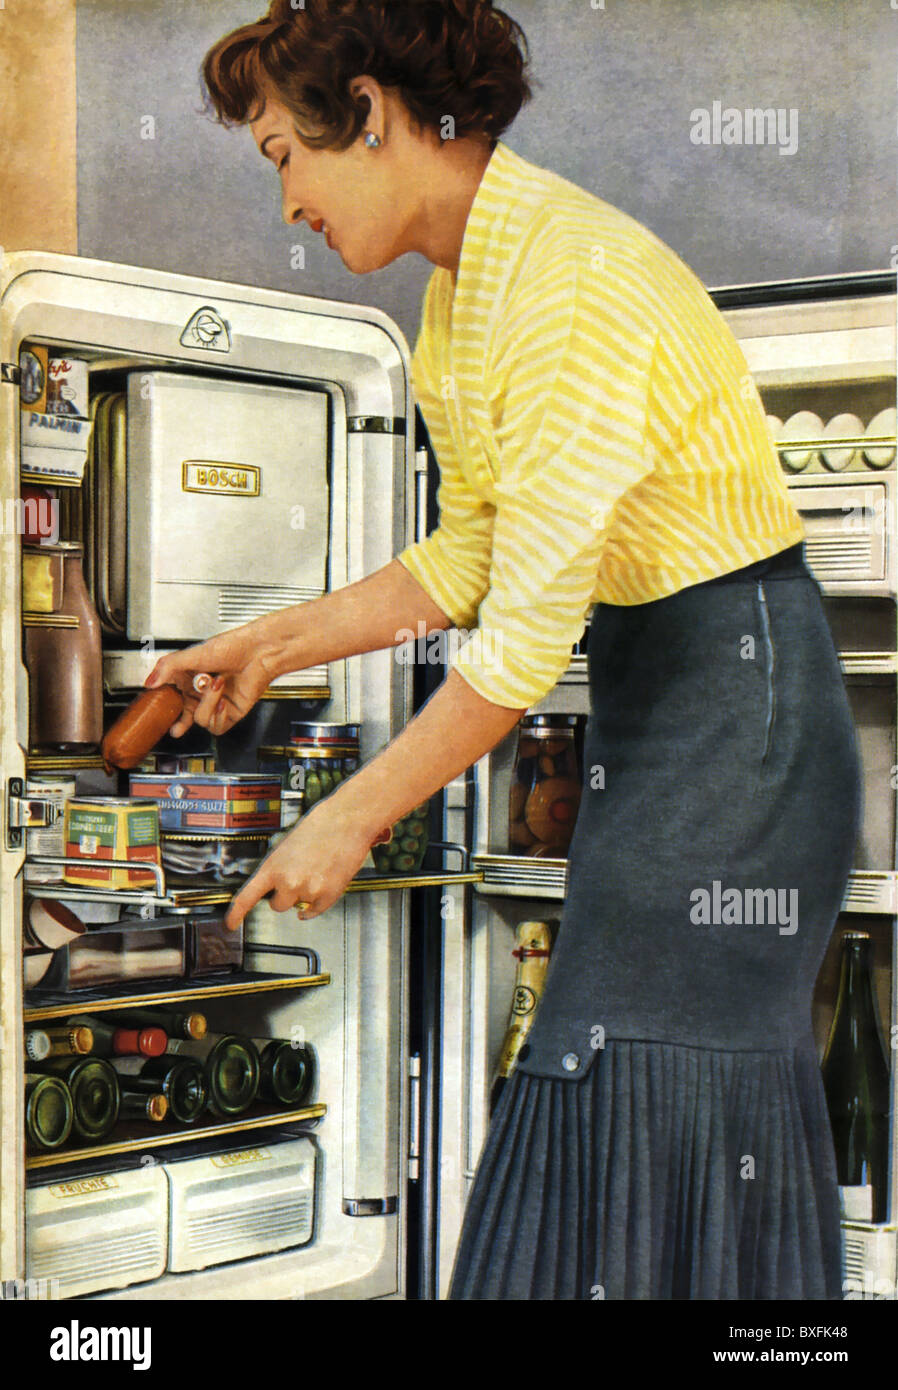 household, kitchen and kitchenware, refrigerator, housewife open fridge, Germany, 1956, Additional-Rights-Clearences-Not Available Stock Photo